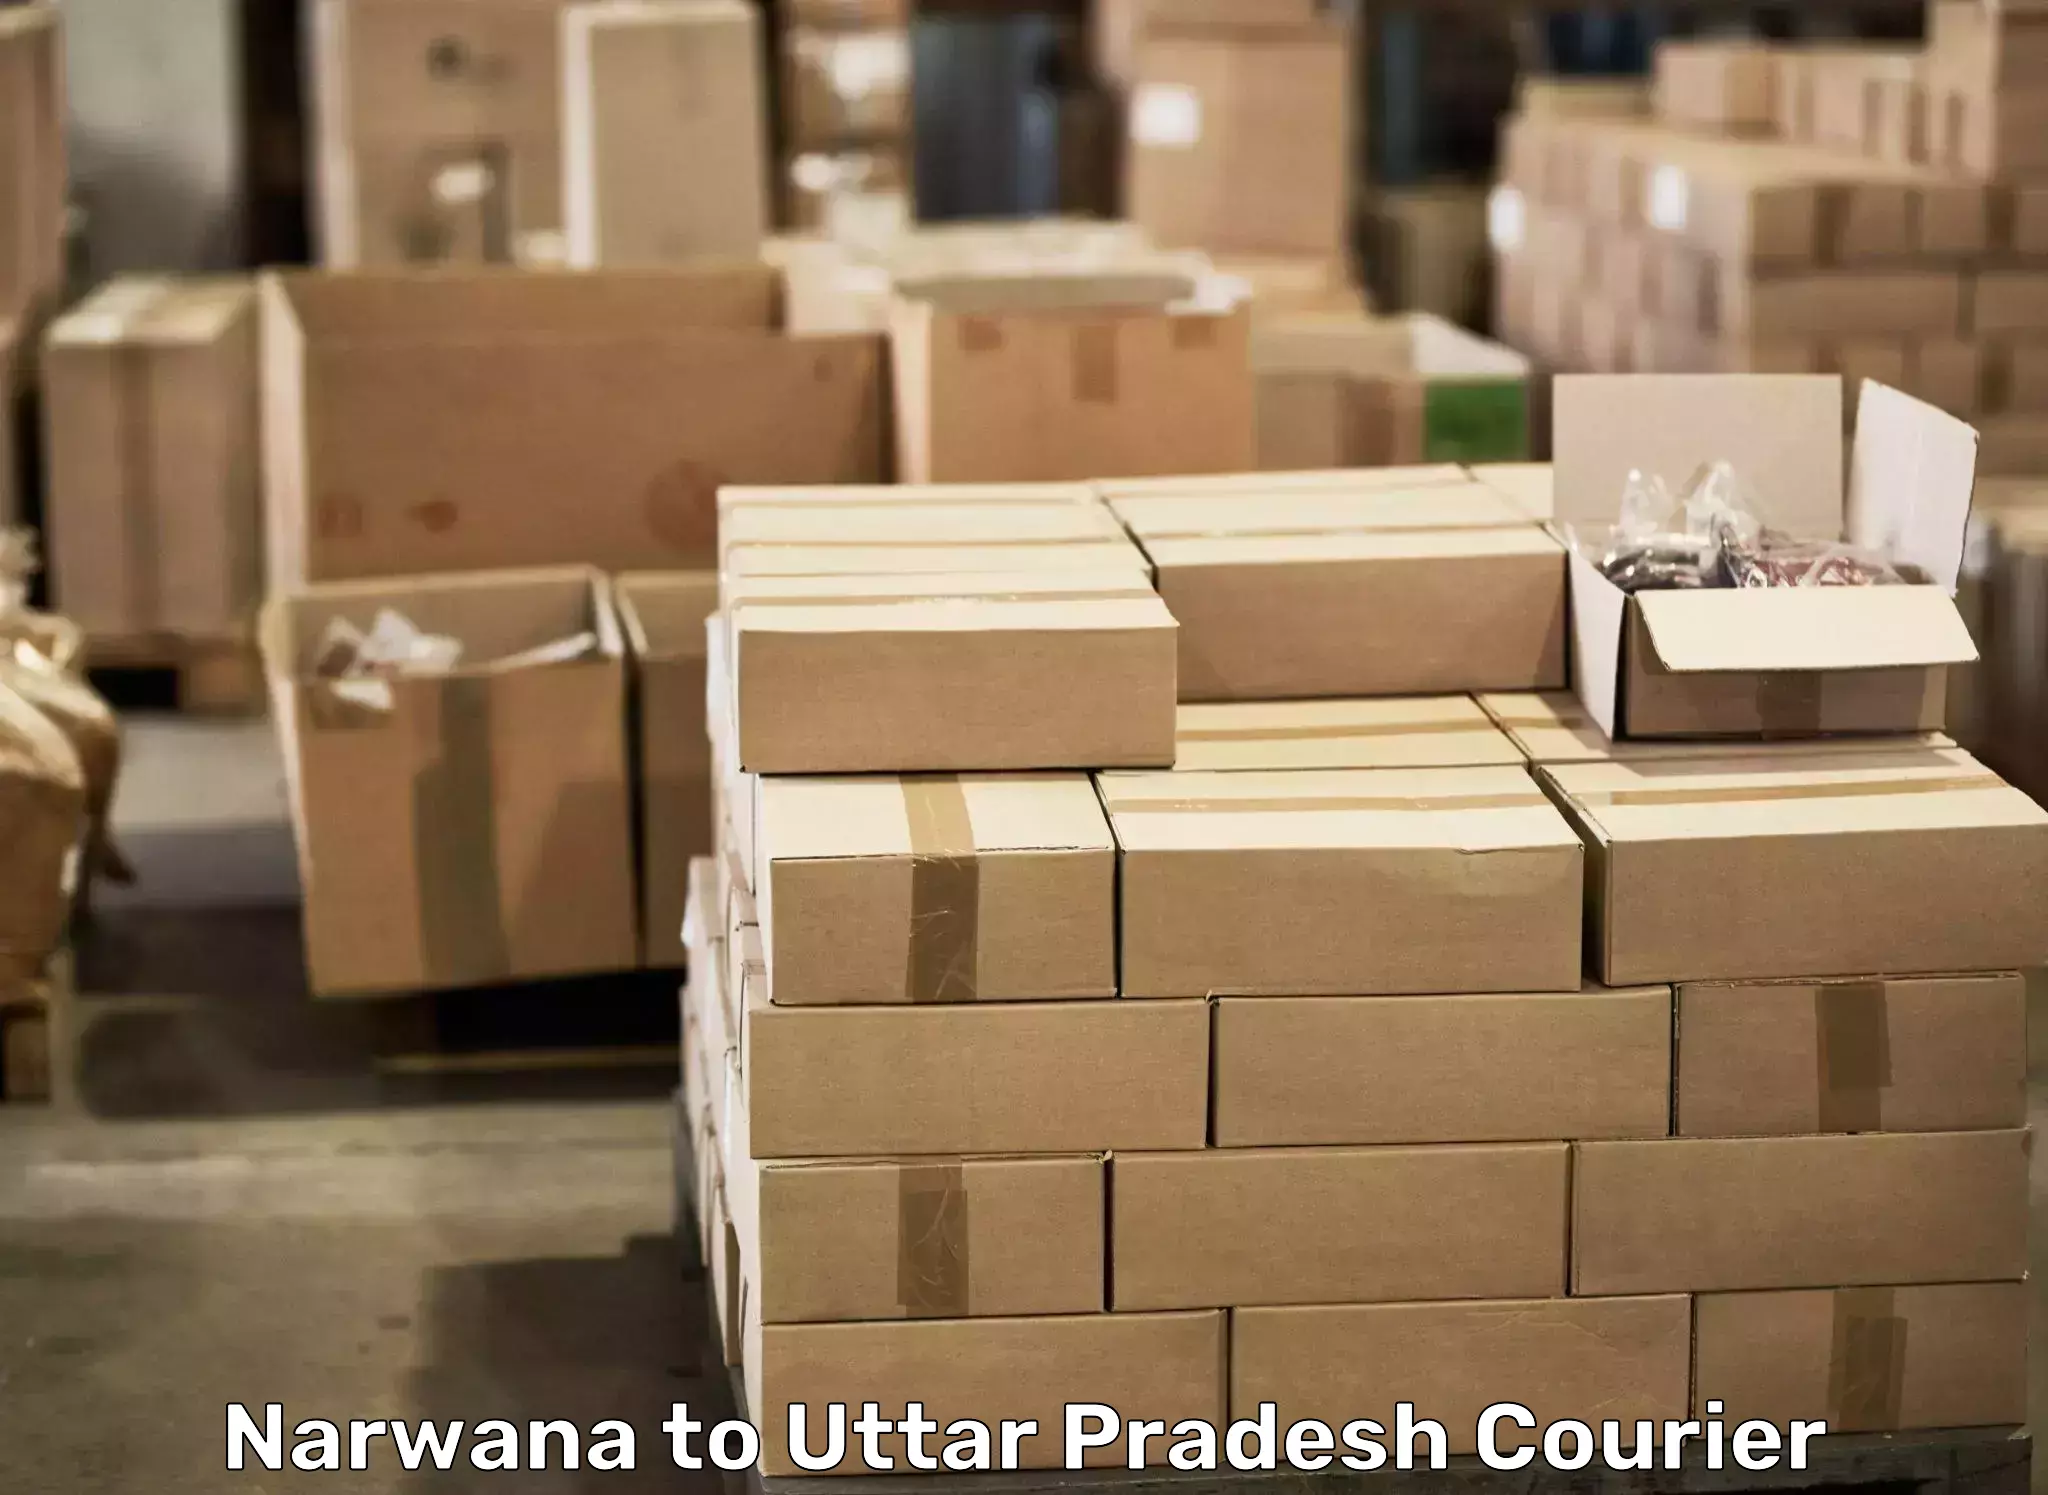 Professional moving assistance Narwana to Kanpur